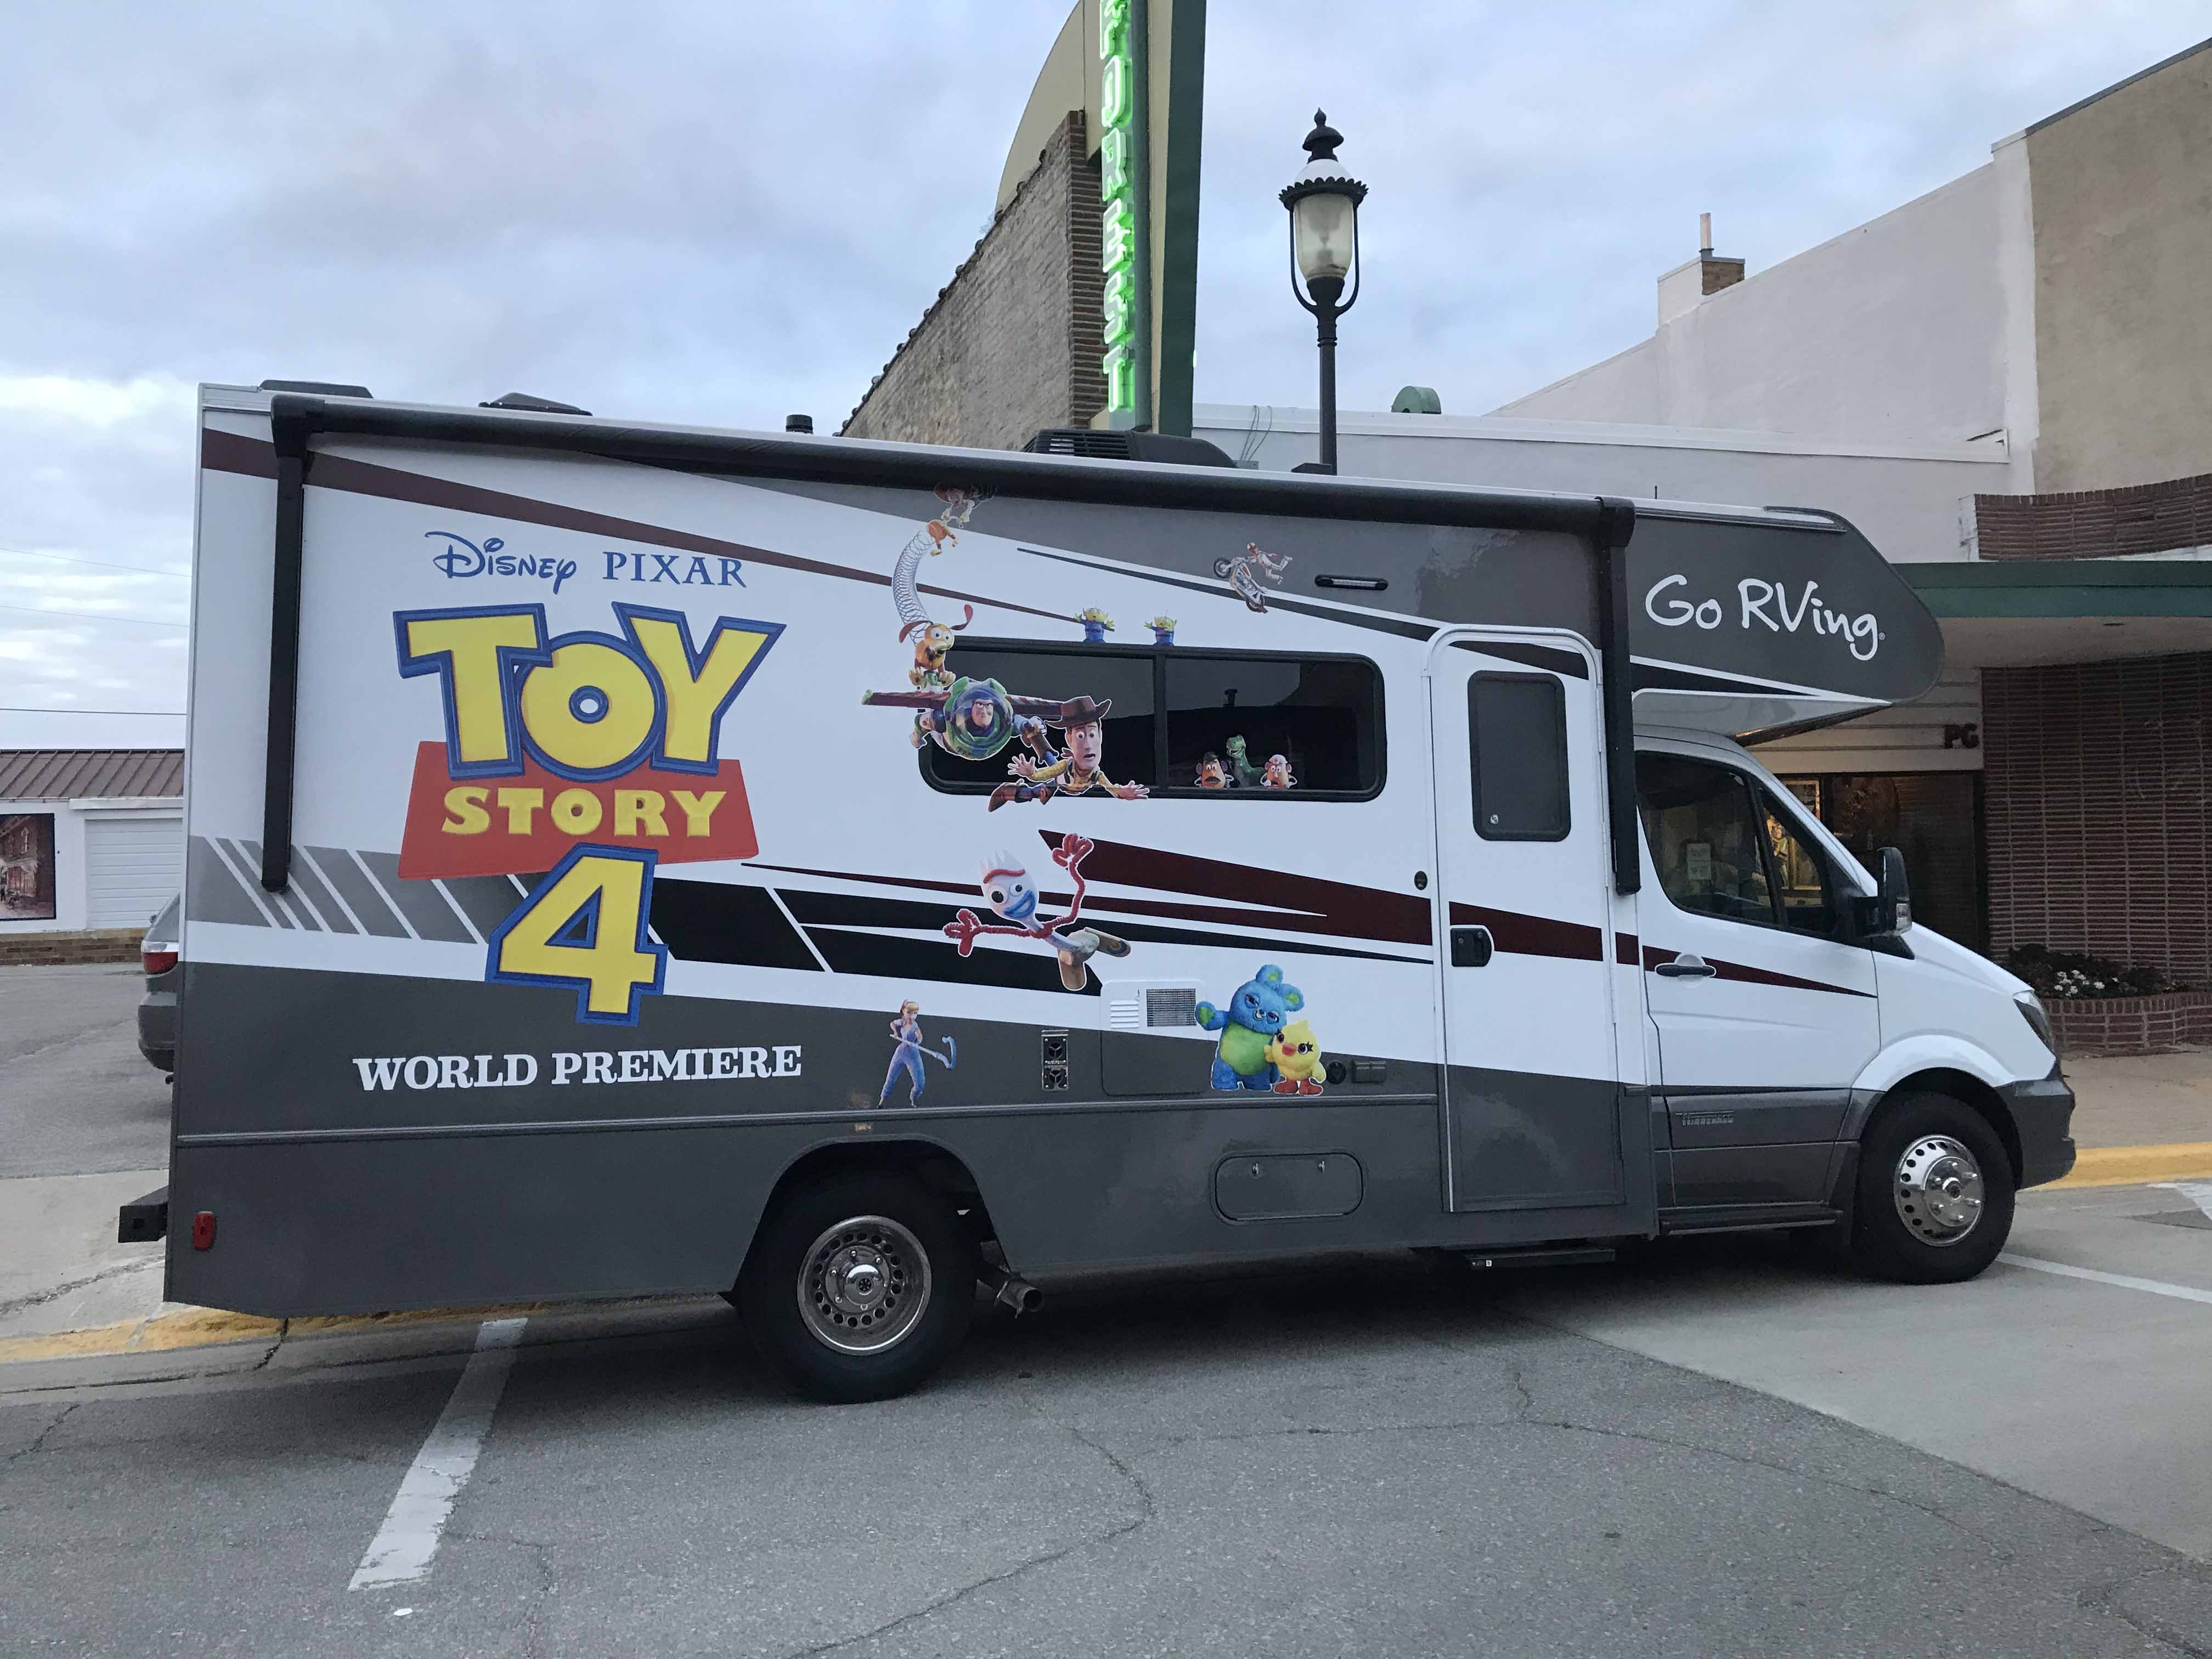 Toy Story 4 instaling